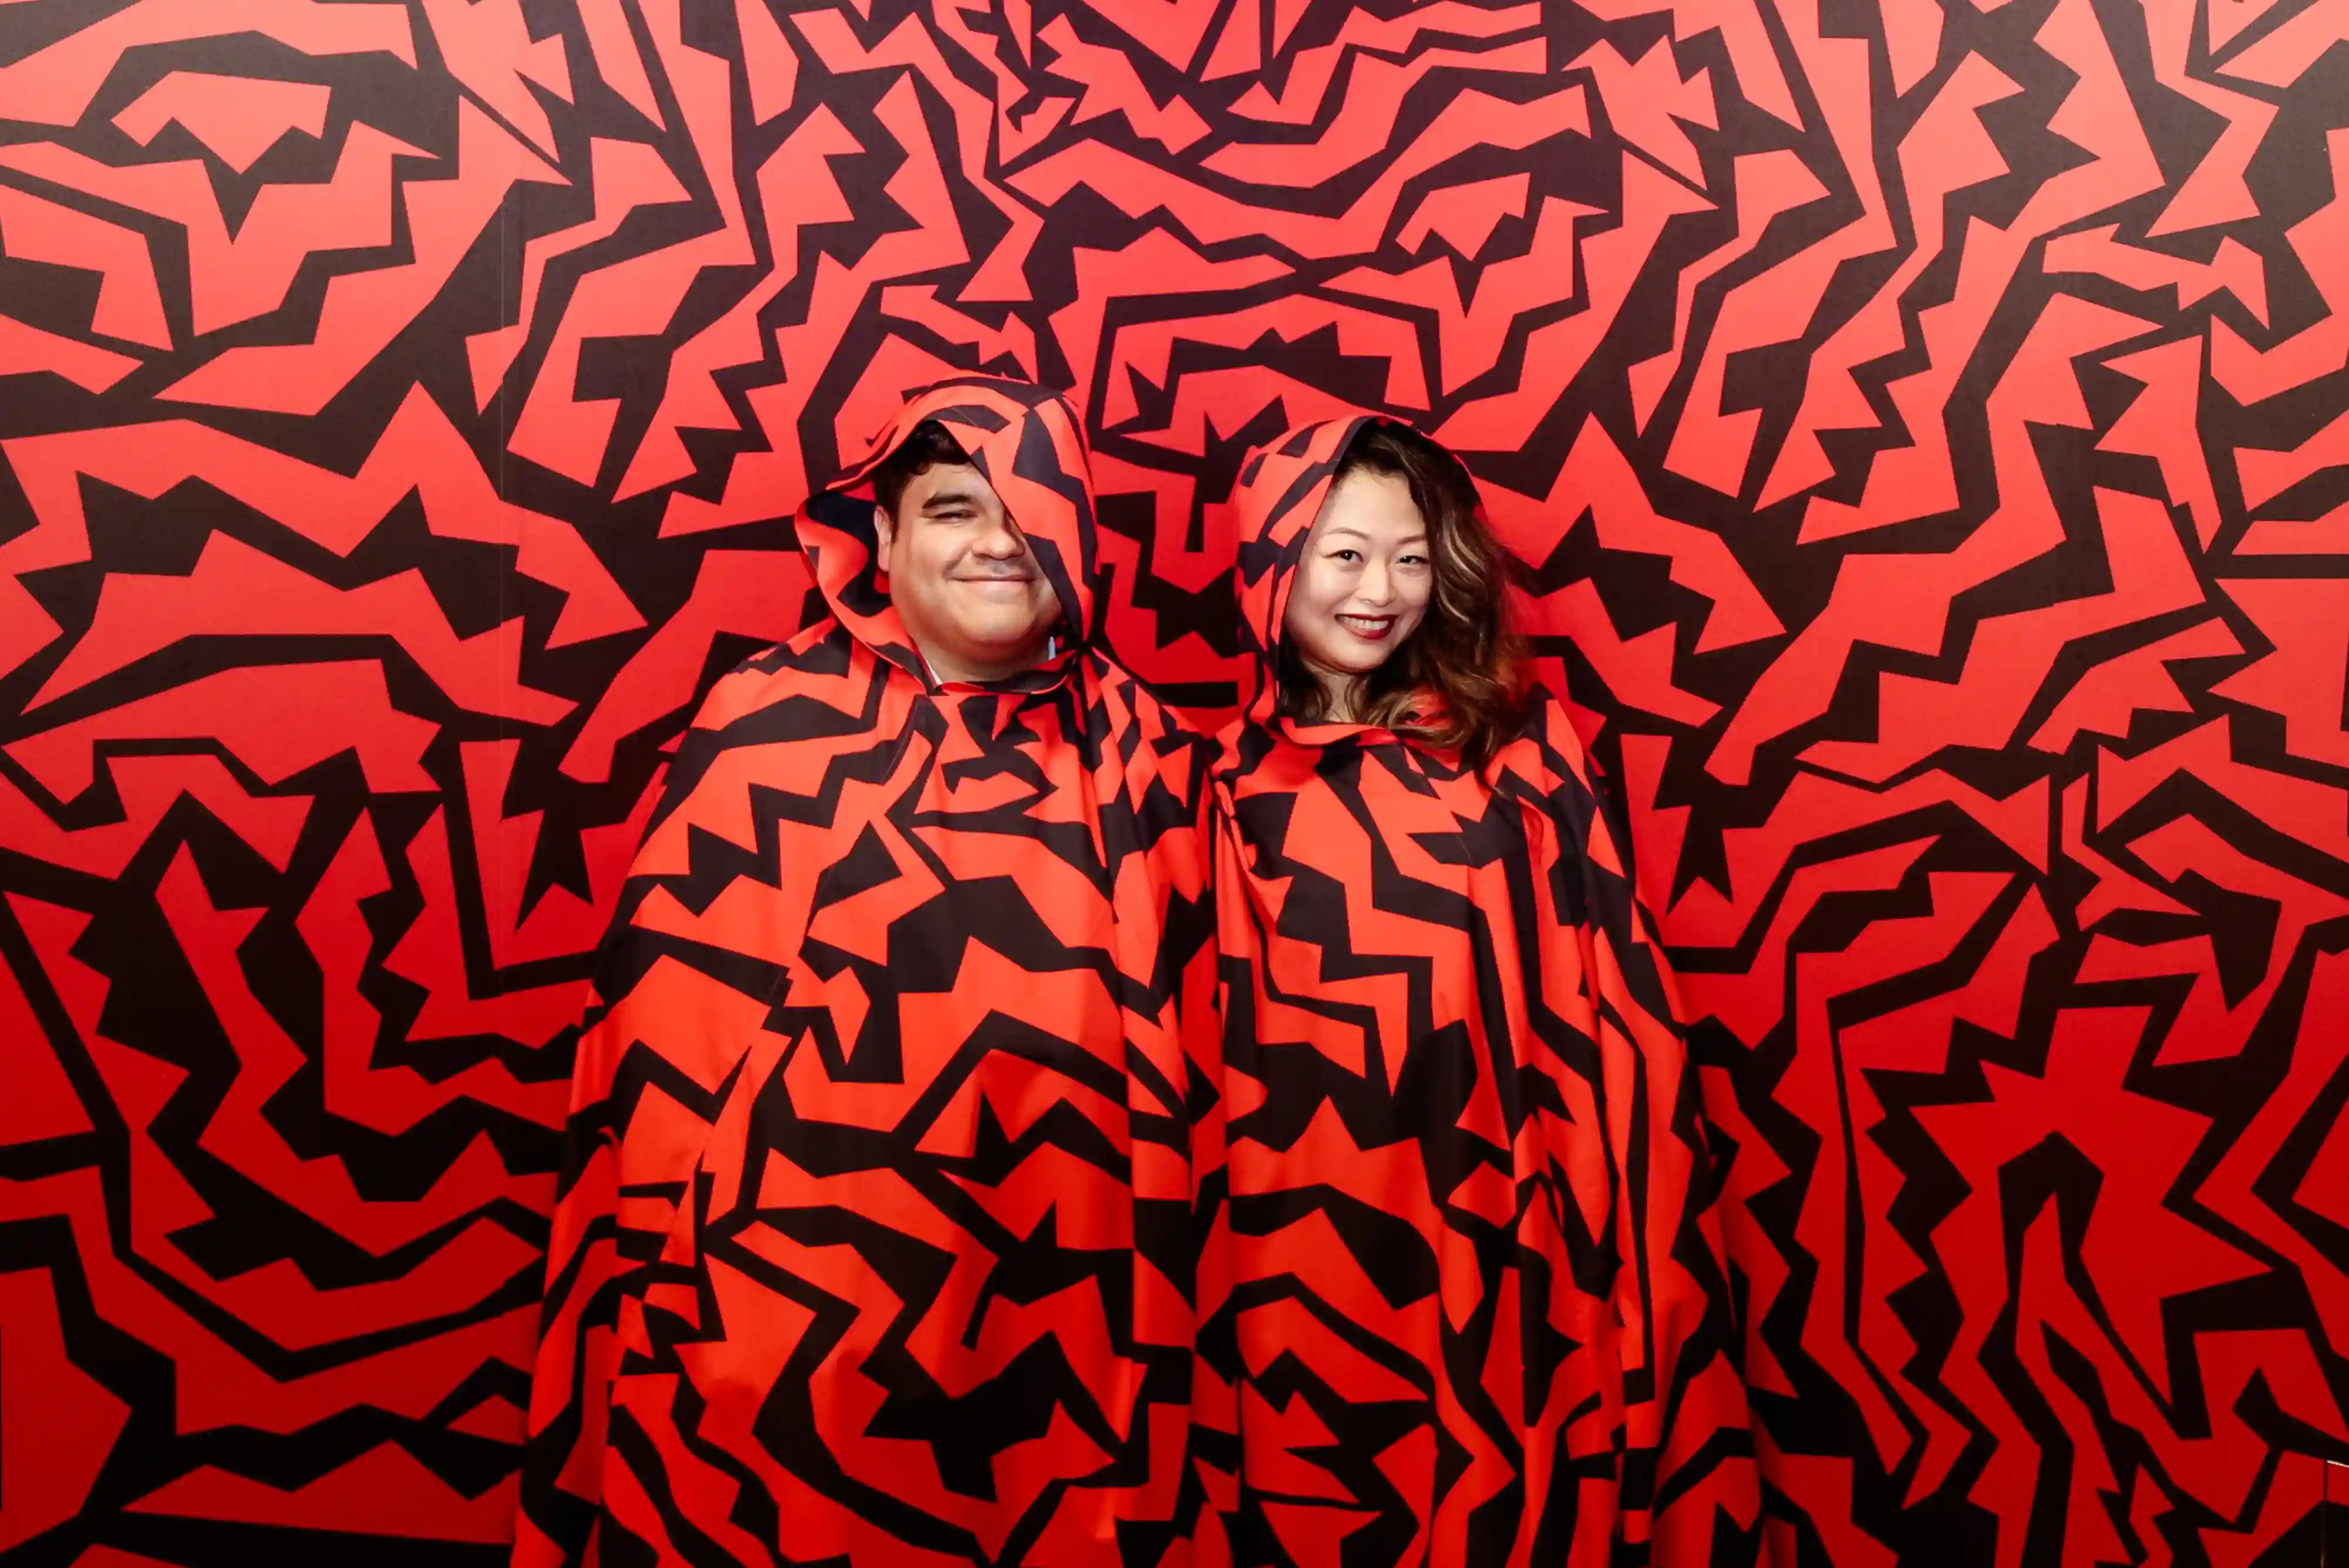 Paradox Museum / Camouflage Room